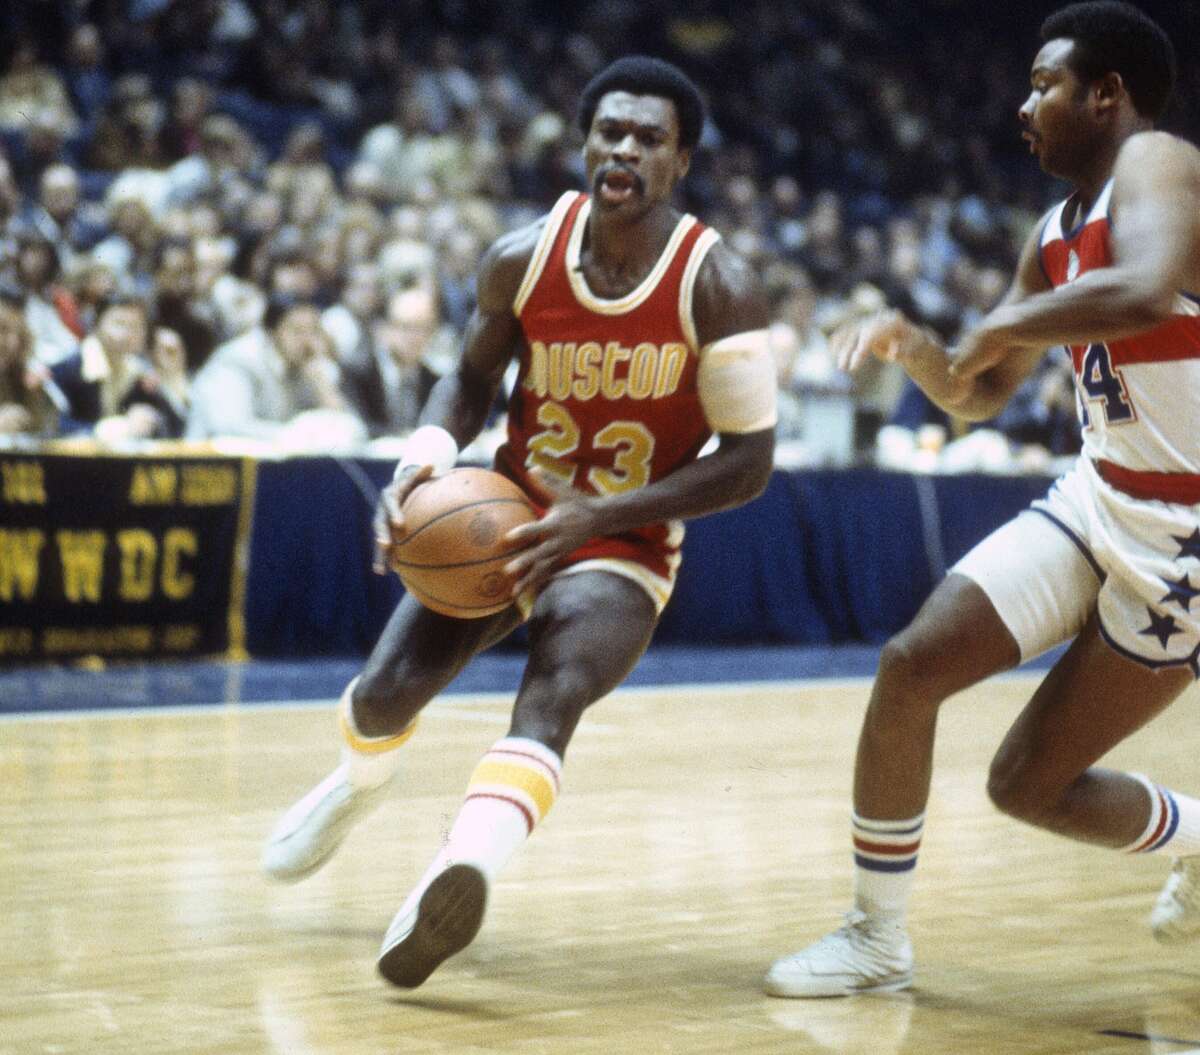 1972-76: New font In their second season in Houston, the Rockets kept the colors on the jerseys the same (yellow letters and numerals) but changed the font with the now-familiar slanted team name across the top instead of the name being curved around the jersey number.